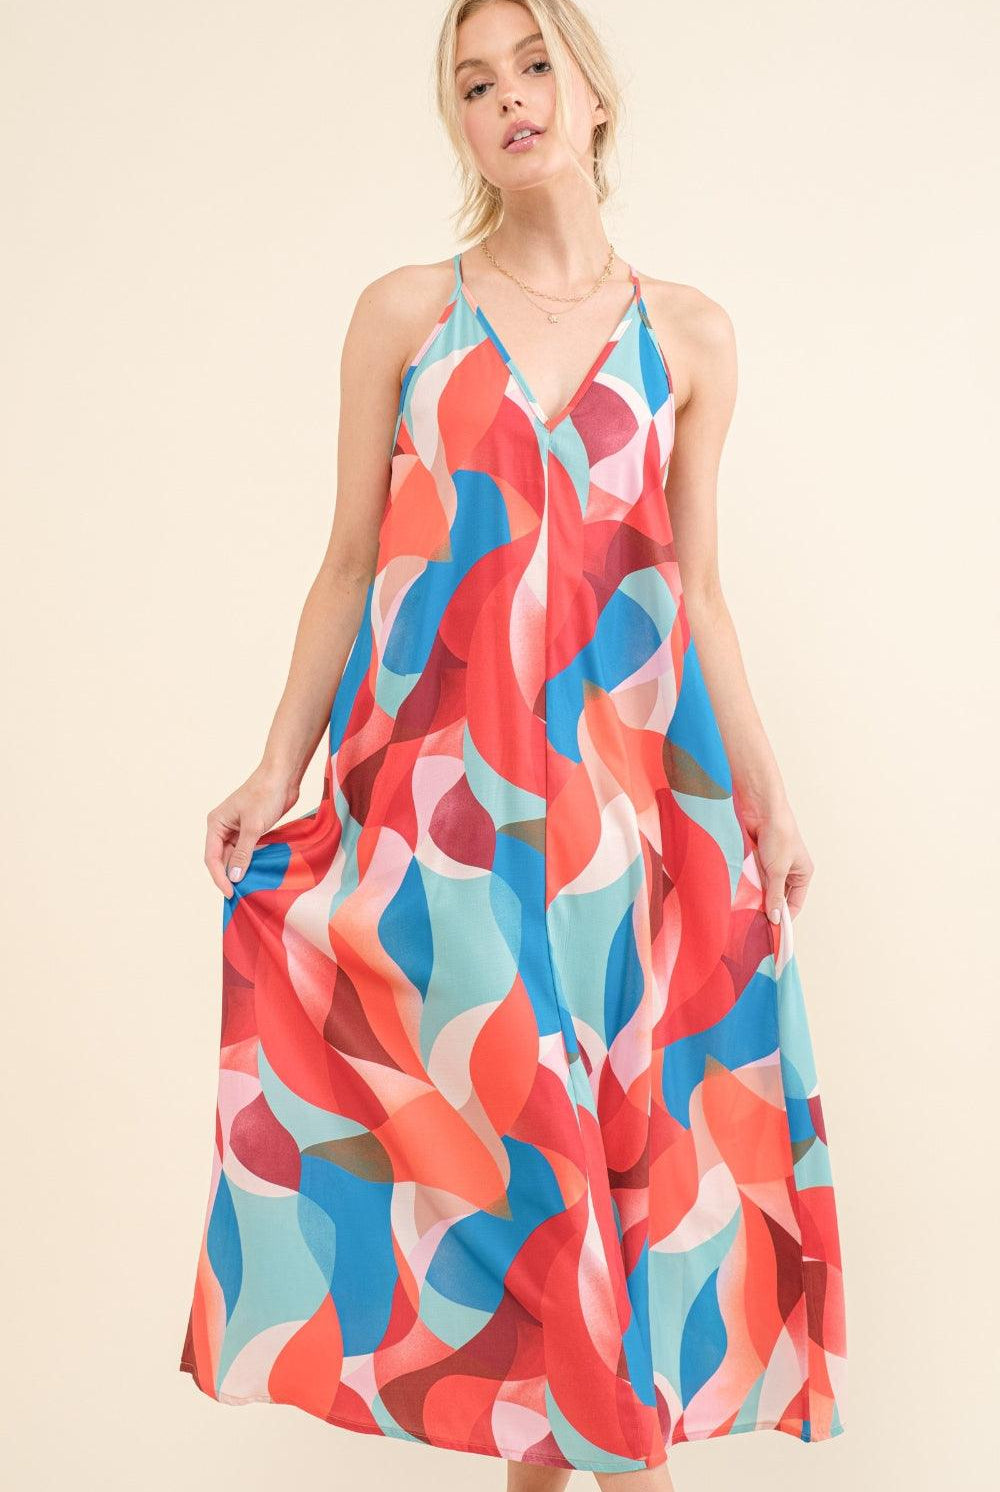 Women's Dresses And the Why Printed Crisscross Back Cami Dress